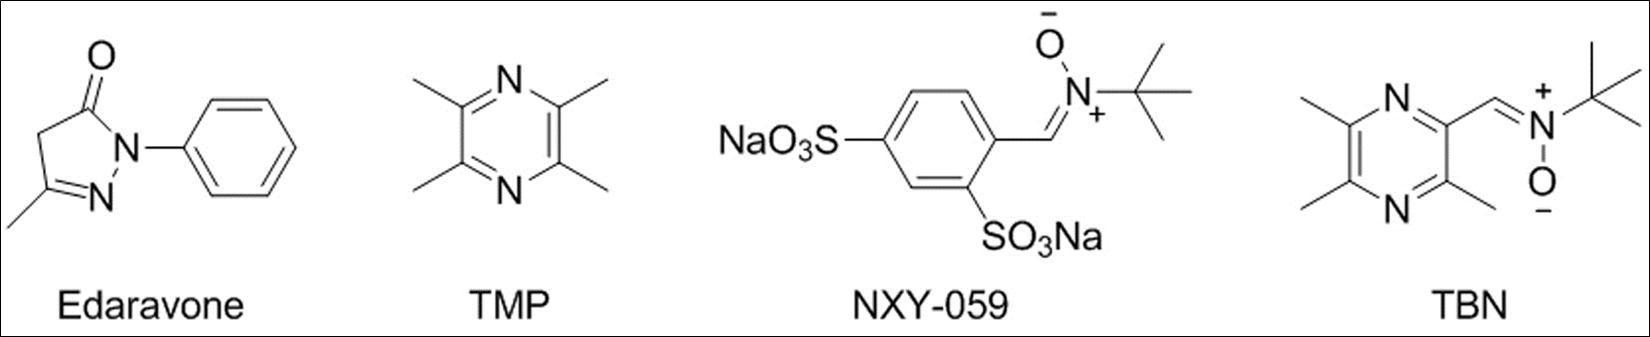  The chemical structures of Edaravone, TMP, NXY-059, and TBN.